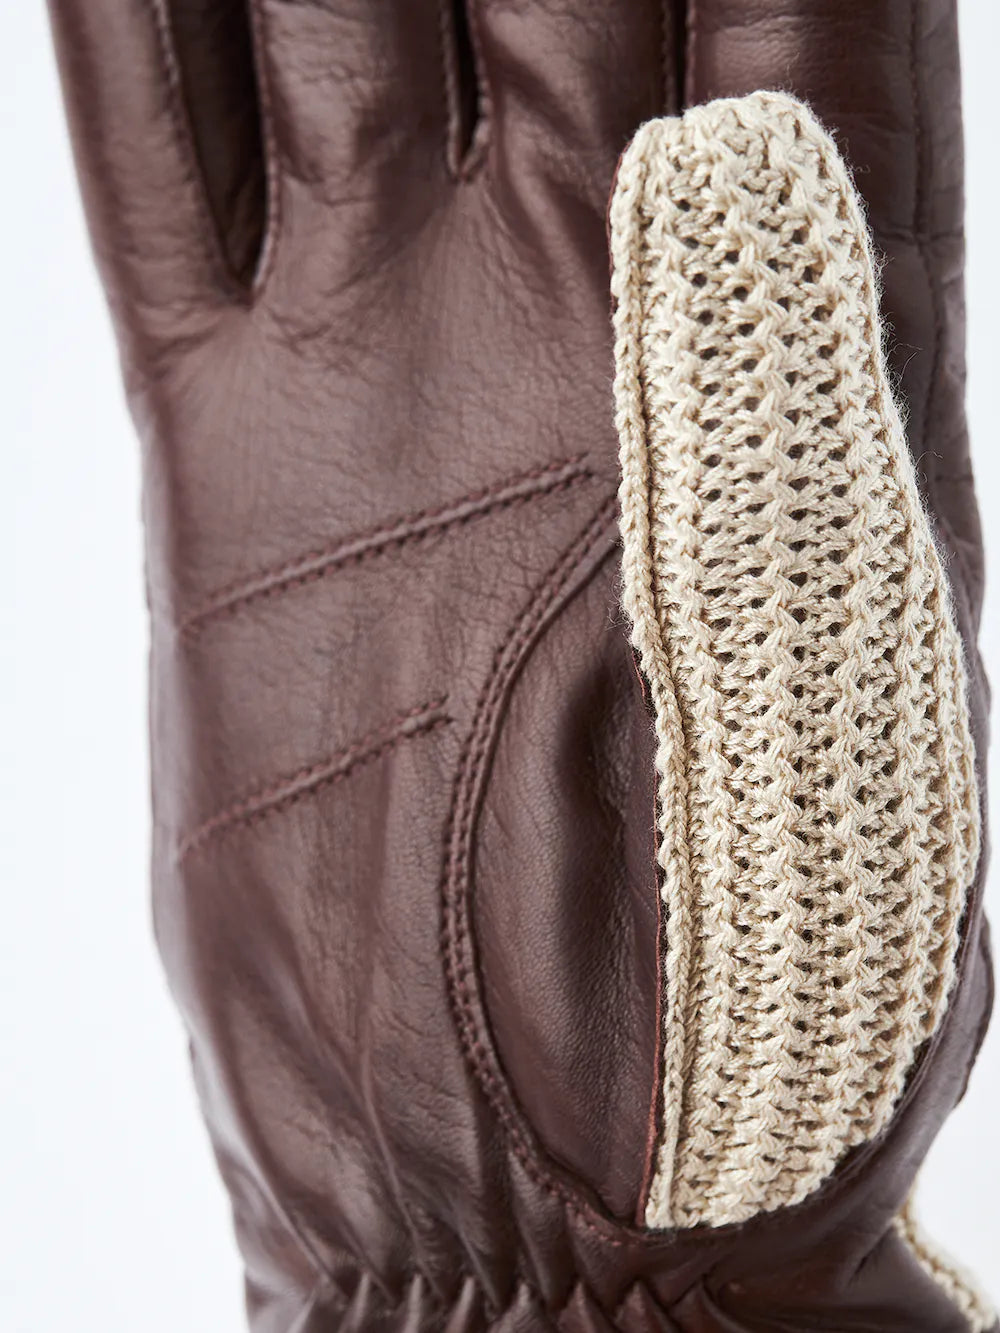 Lined men’s leather glove with crochet detail